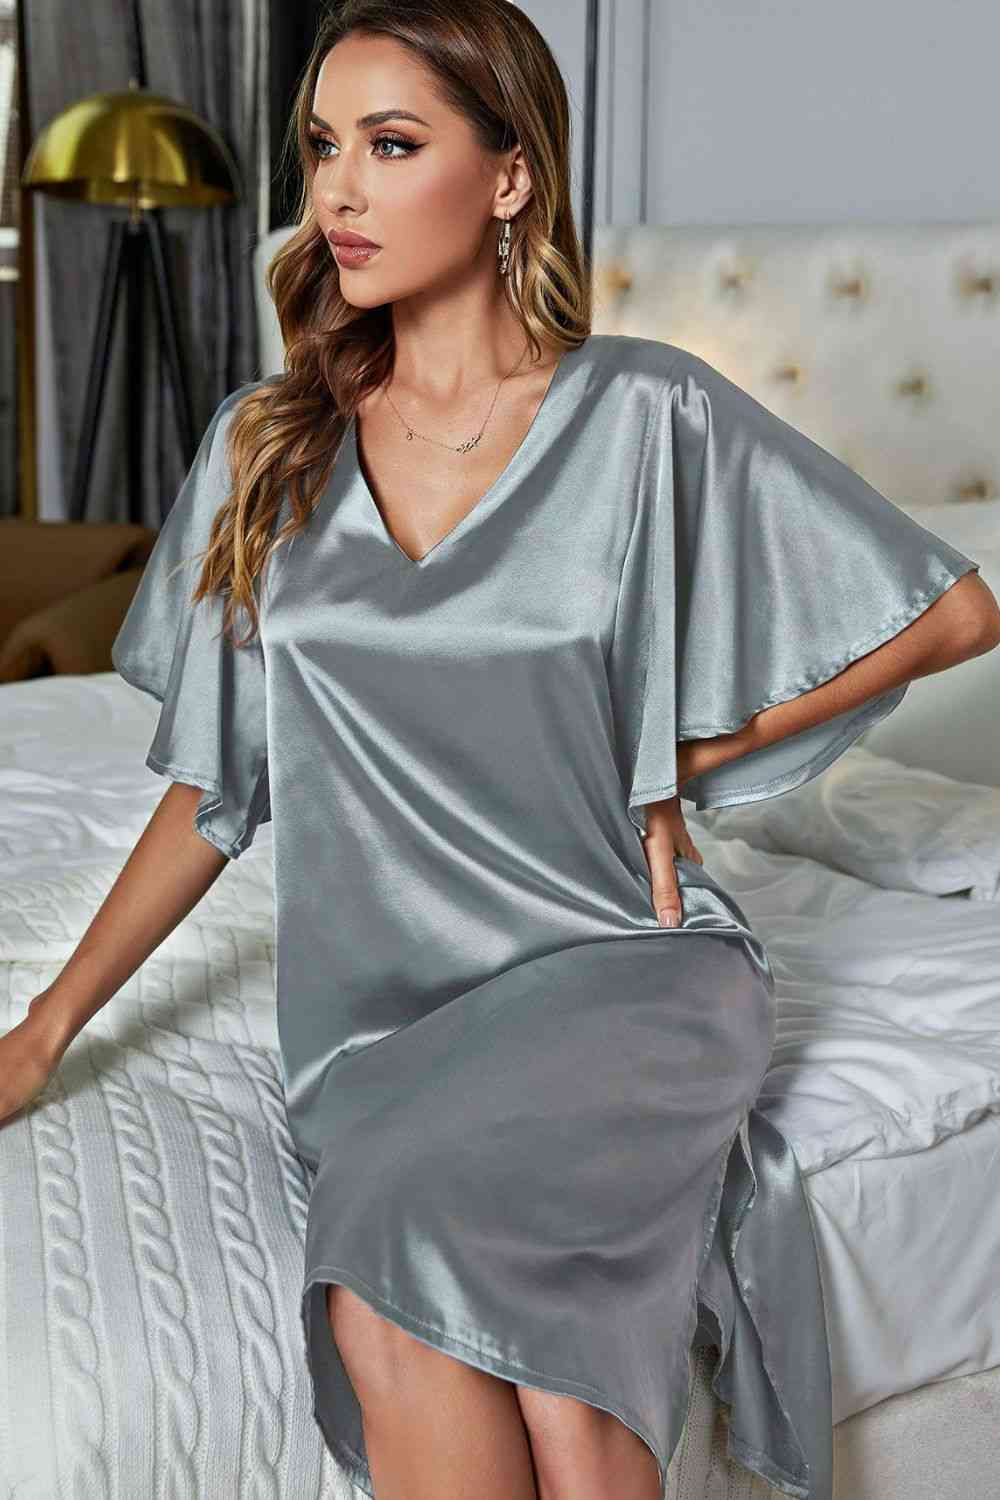 Model sitting on bed wearing silver knee length nightgown